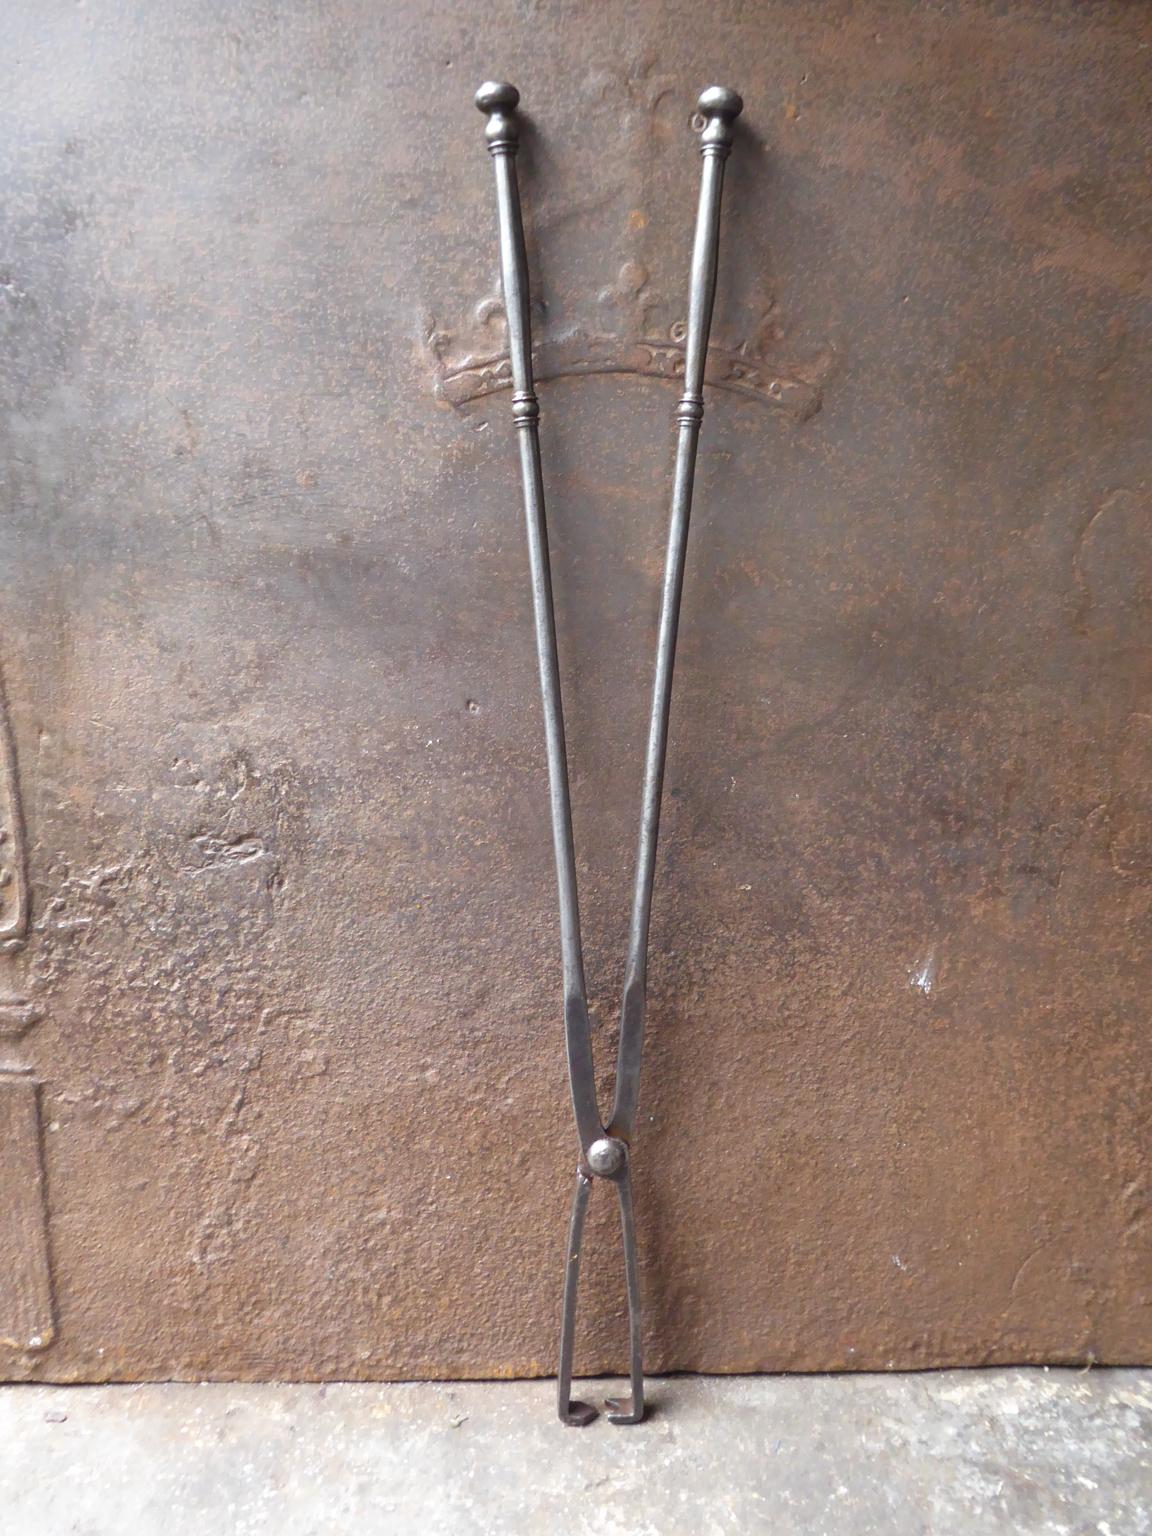 Large late 18th or early 19th century French neoclassical fireplace tongs. The tongs are hand forged and made of wrought iron. The fire tongs are in a good condition and are fully functional.